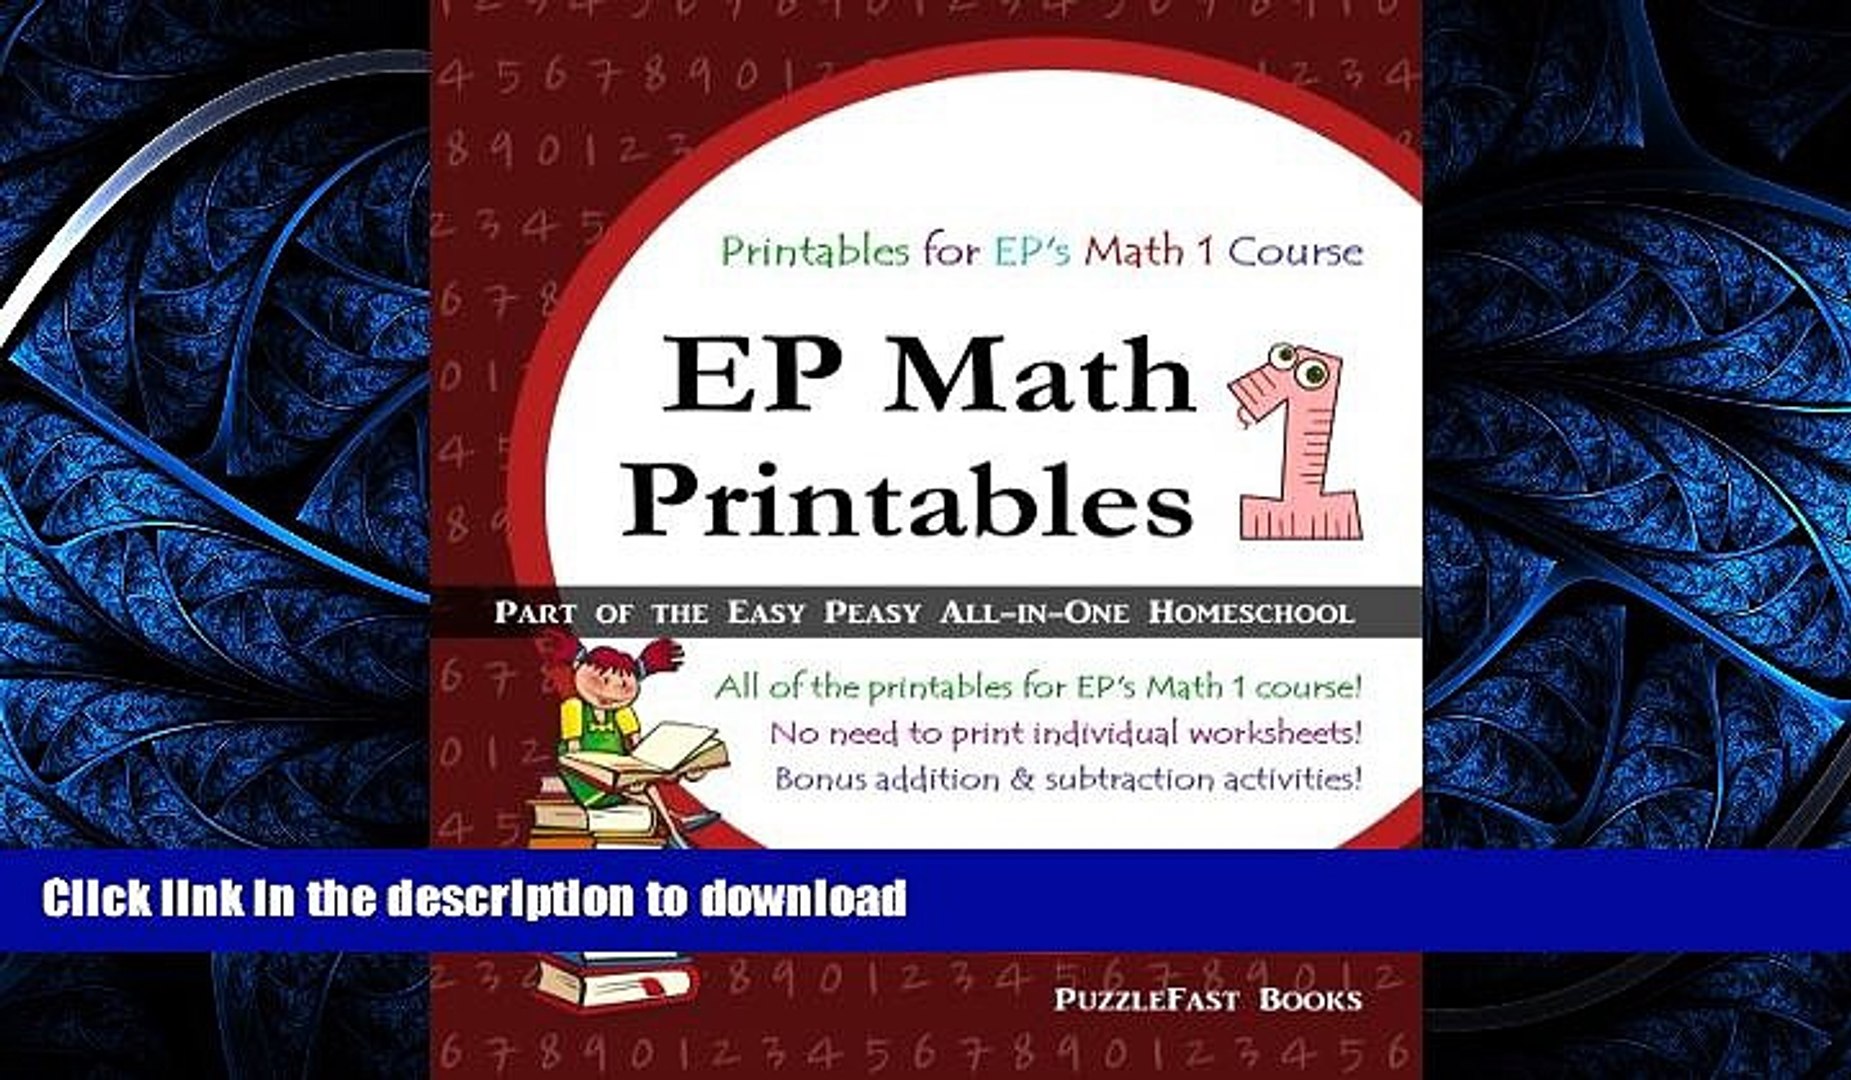 ep-math-1-printables-part-of-the-easy-peasy-all-in-one-homeschool-epub-download-free